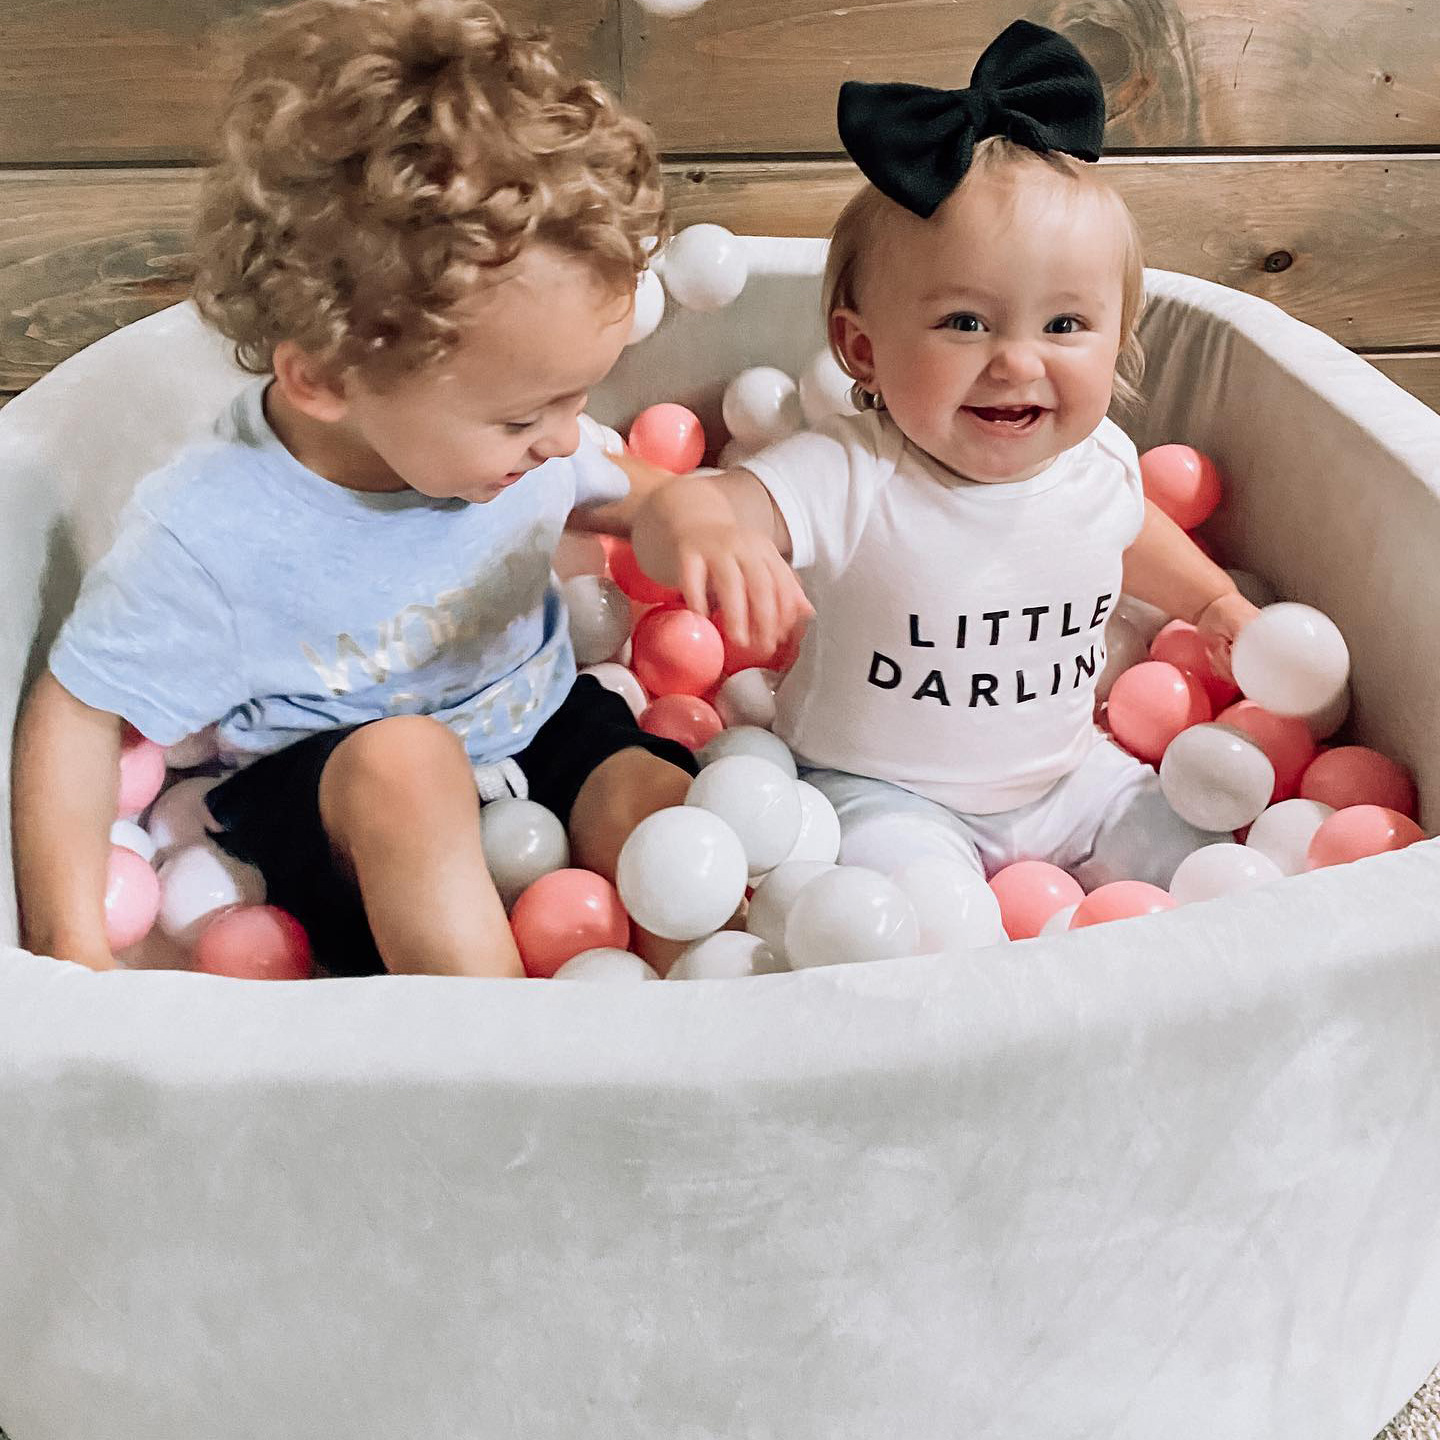 Toddler and baby playing in a ball pit